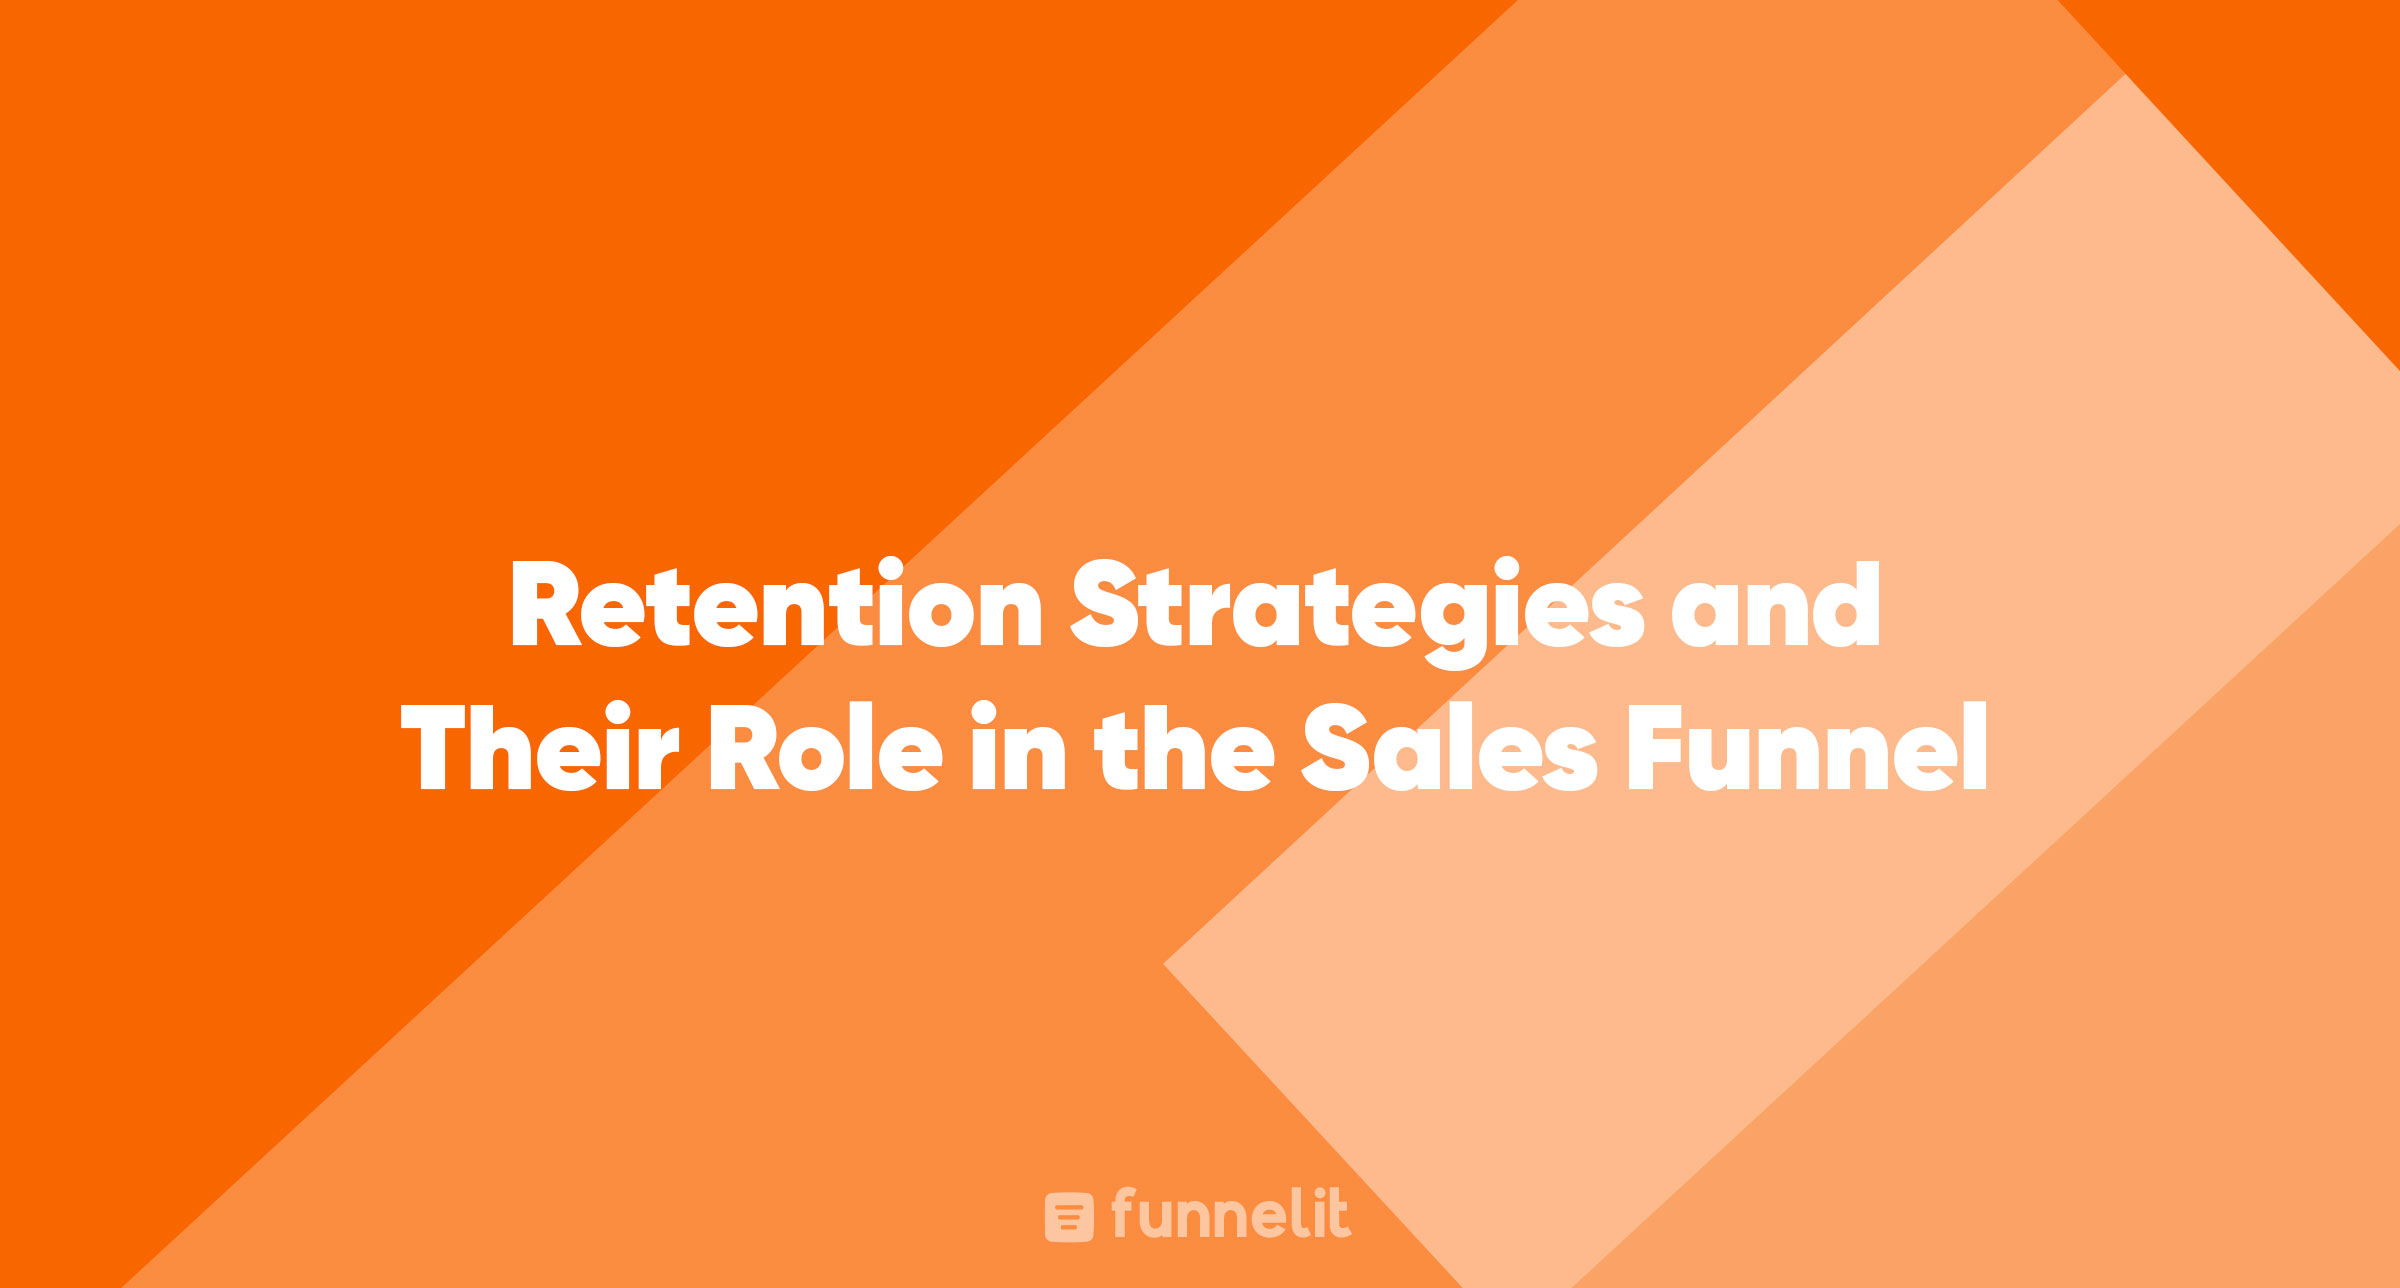 Article | Retention Strategies and Their Role in the Sales Funnel